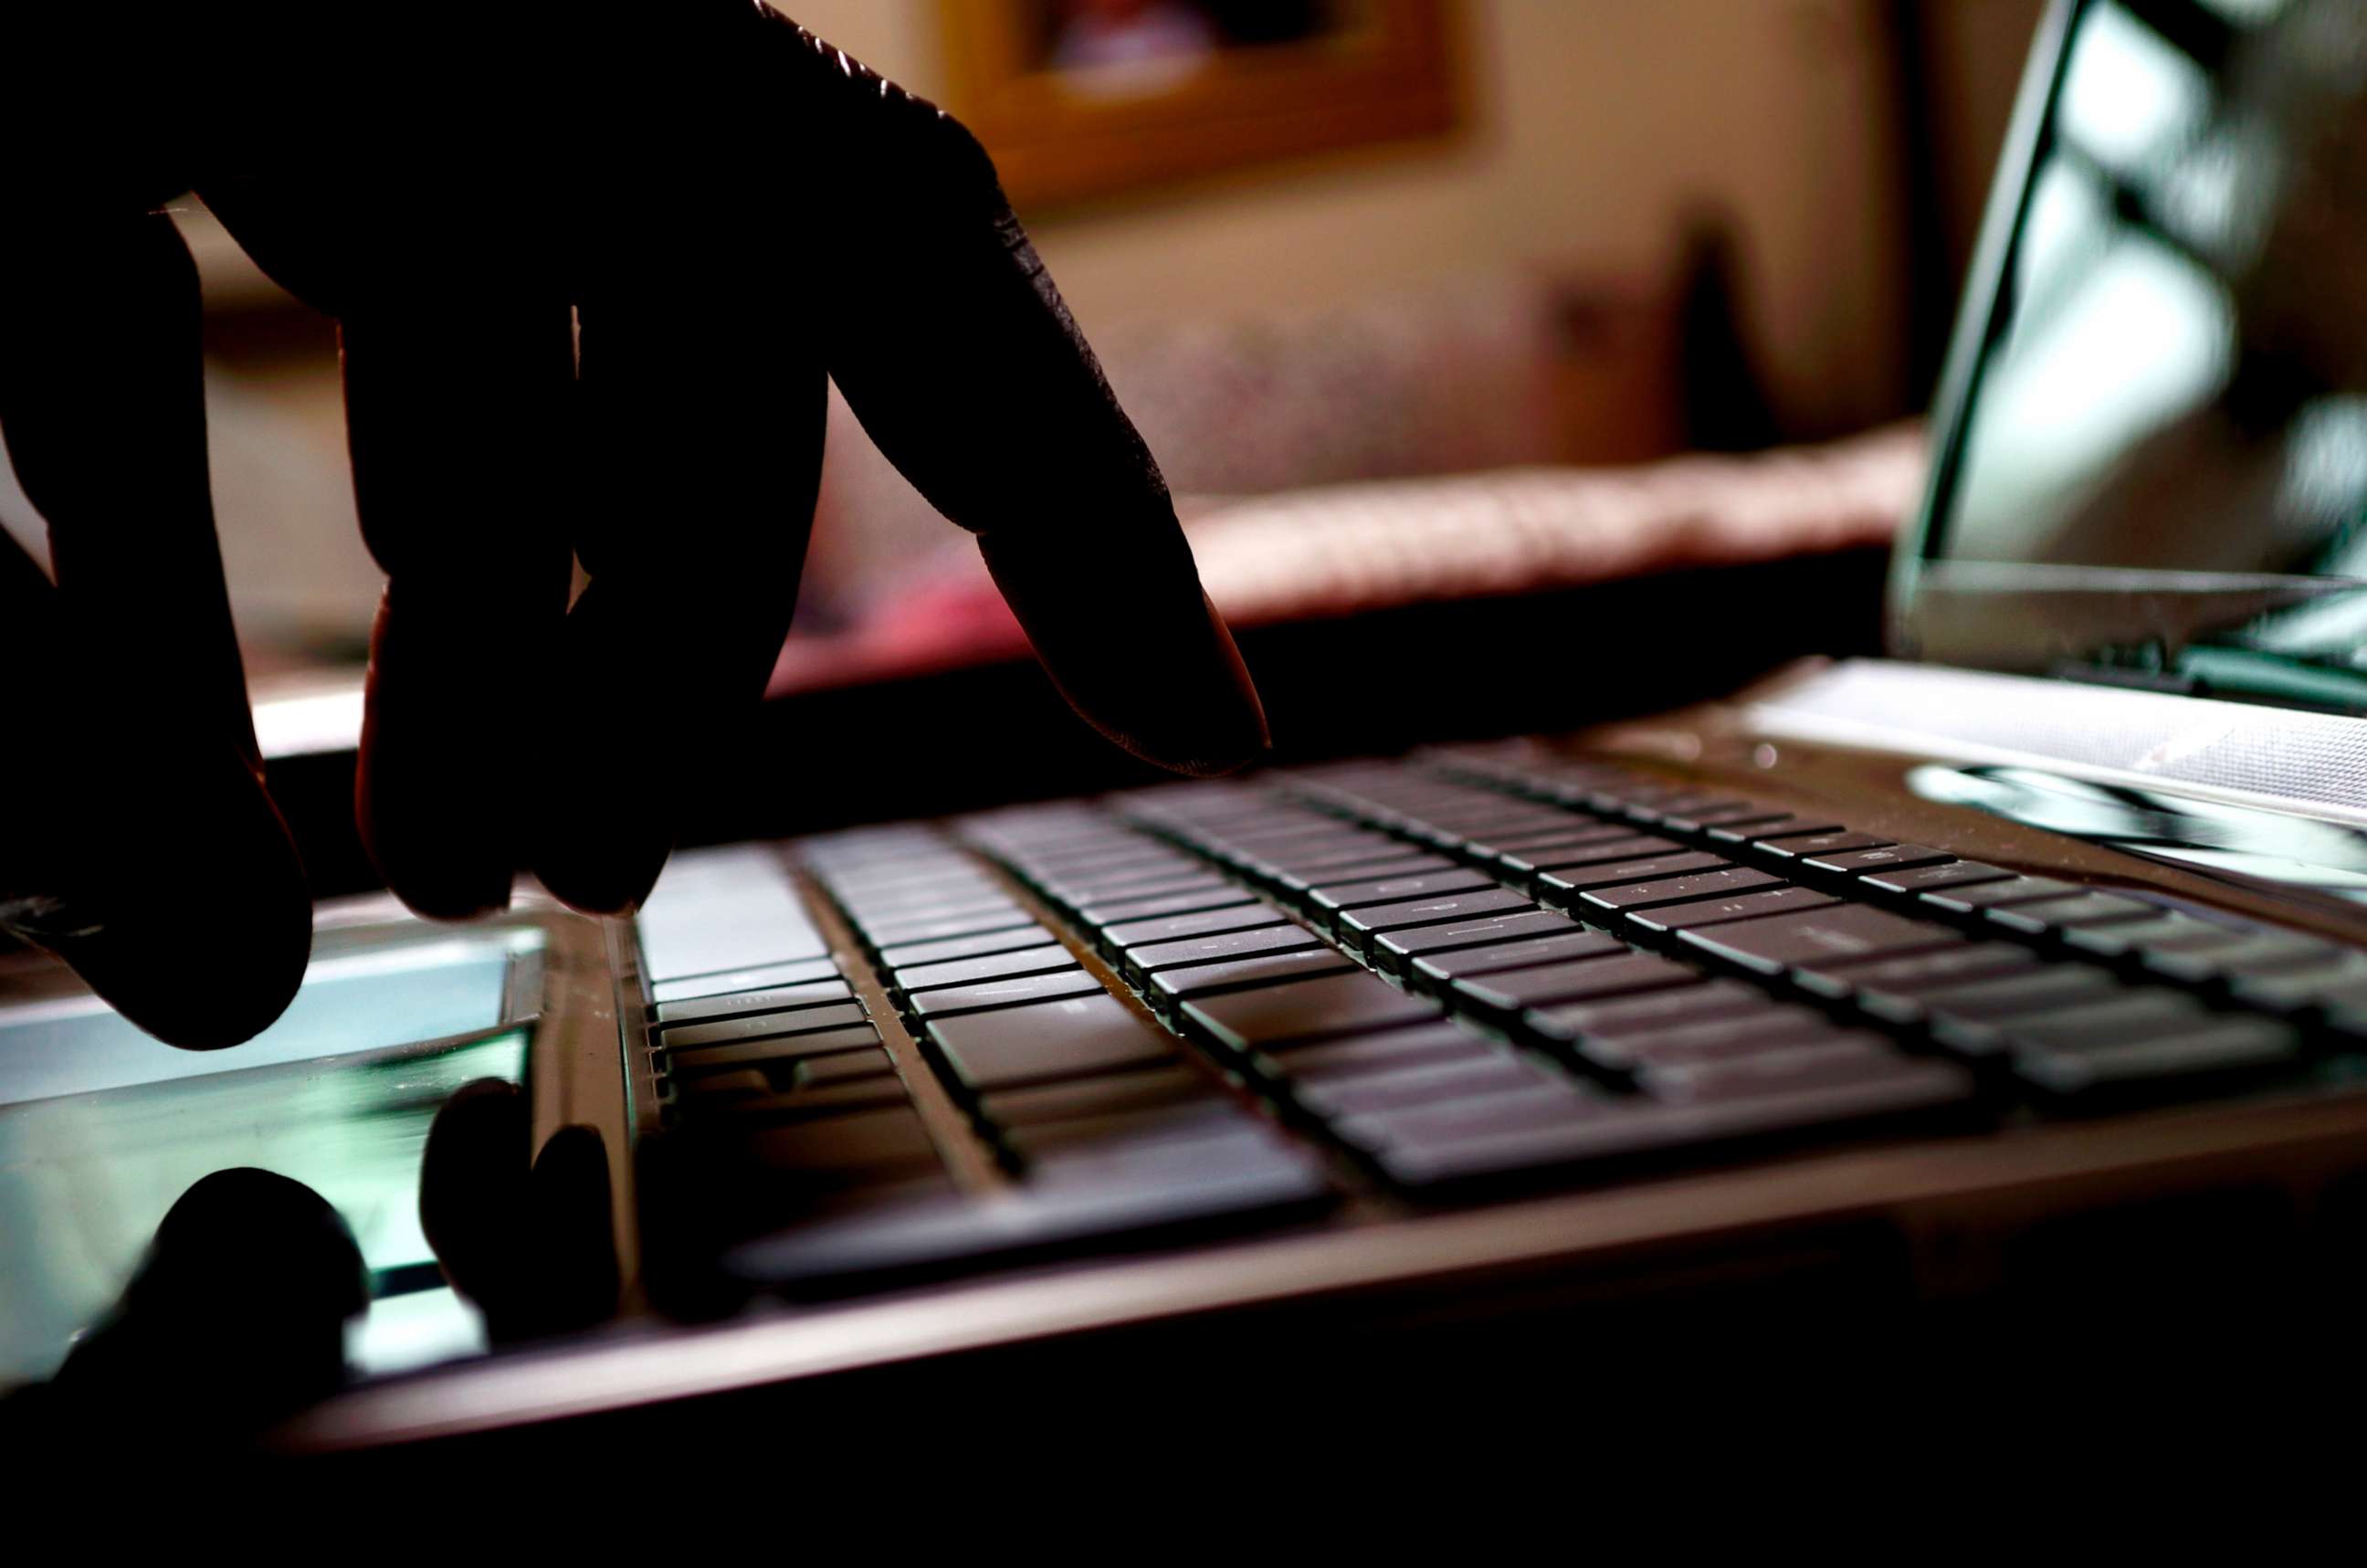 PHOTO: A person types on a laptop in this undated stock image.